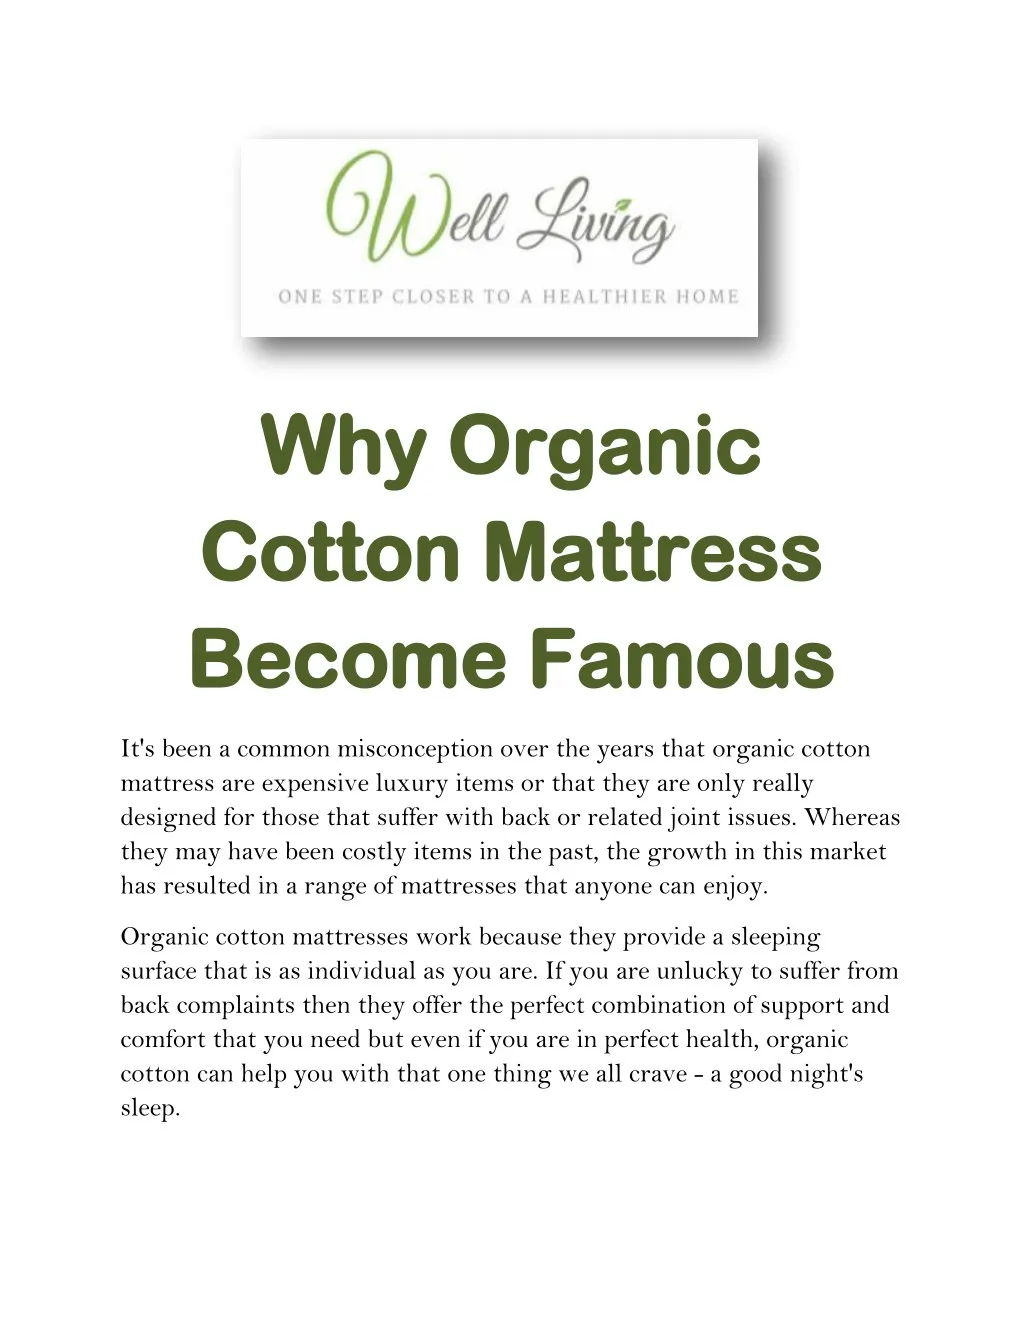 why or why organic cott cotton mat on mattress